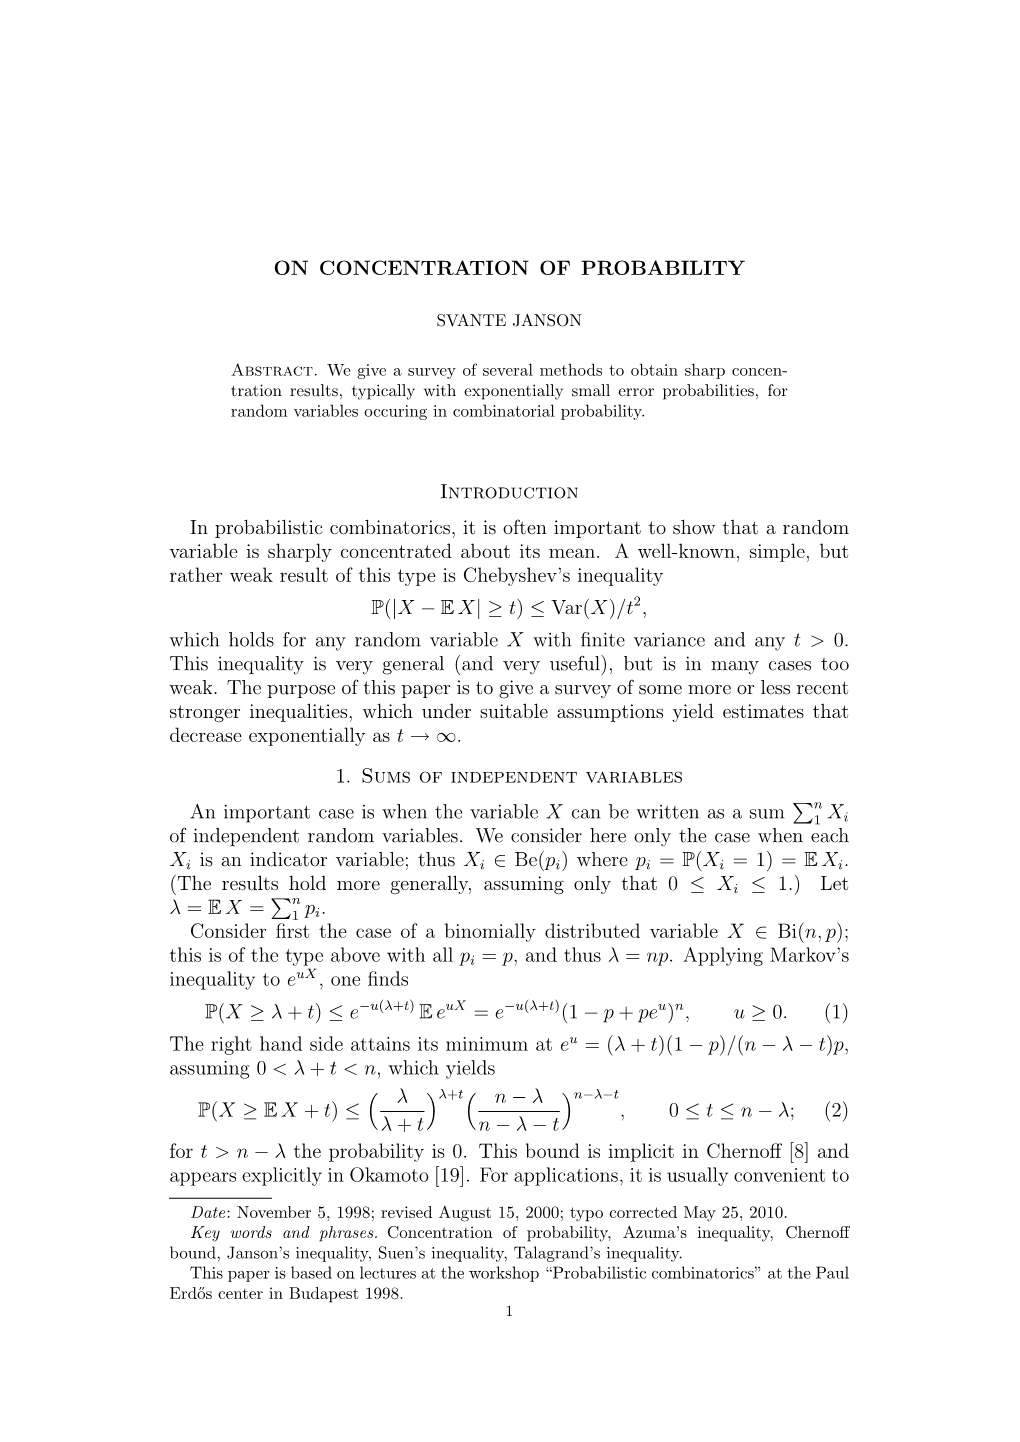 ON CONCENTRATION of PROBABILITY Introduction in Probabilistic Combinatorics, It Is Often Important to Show That a Random Variabl